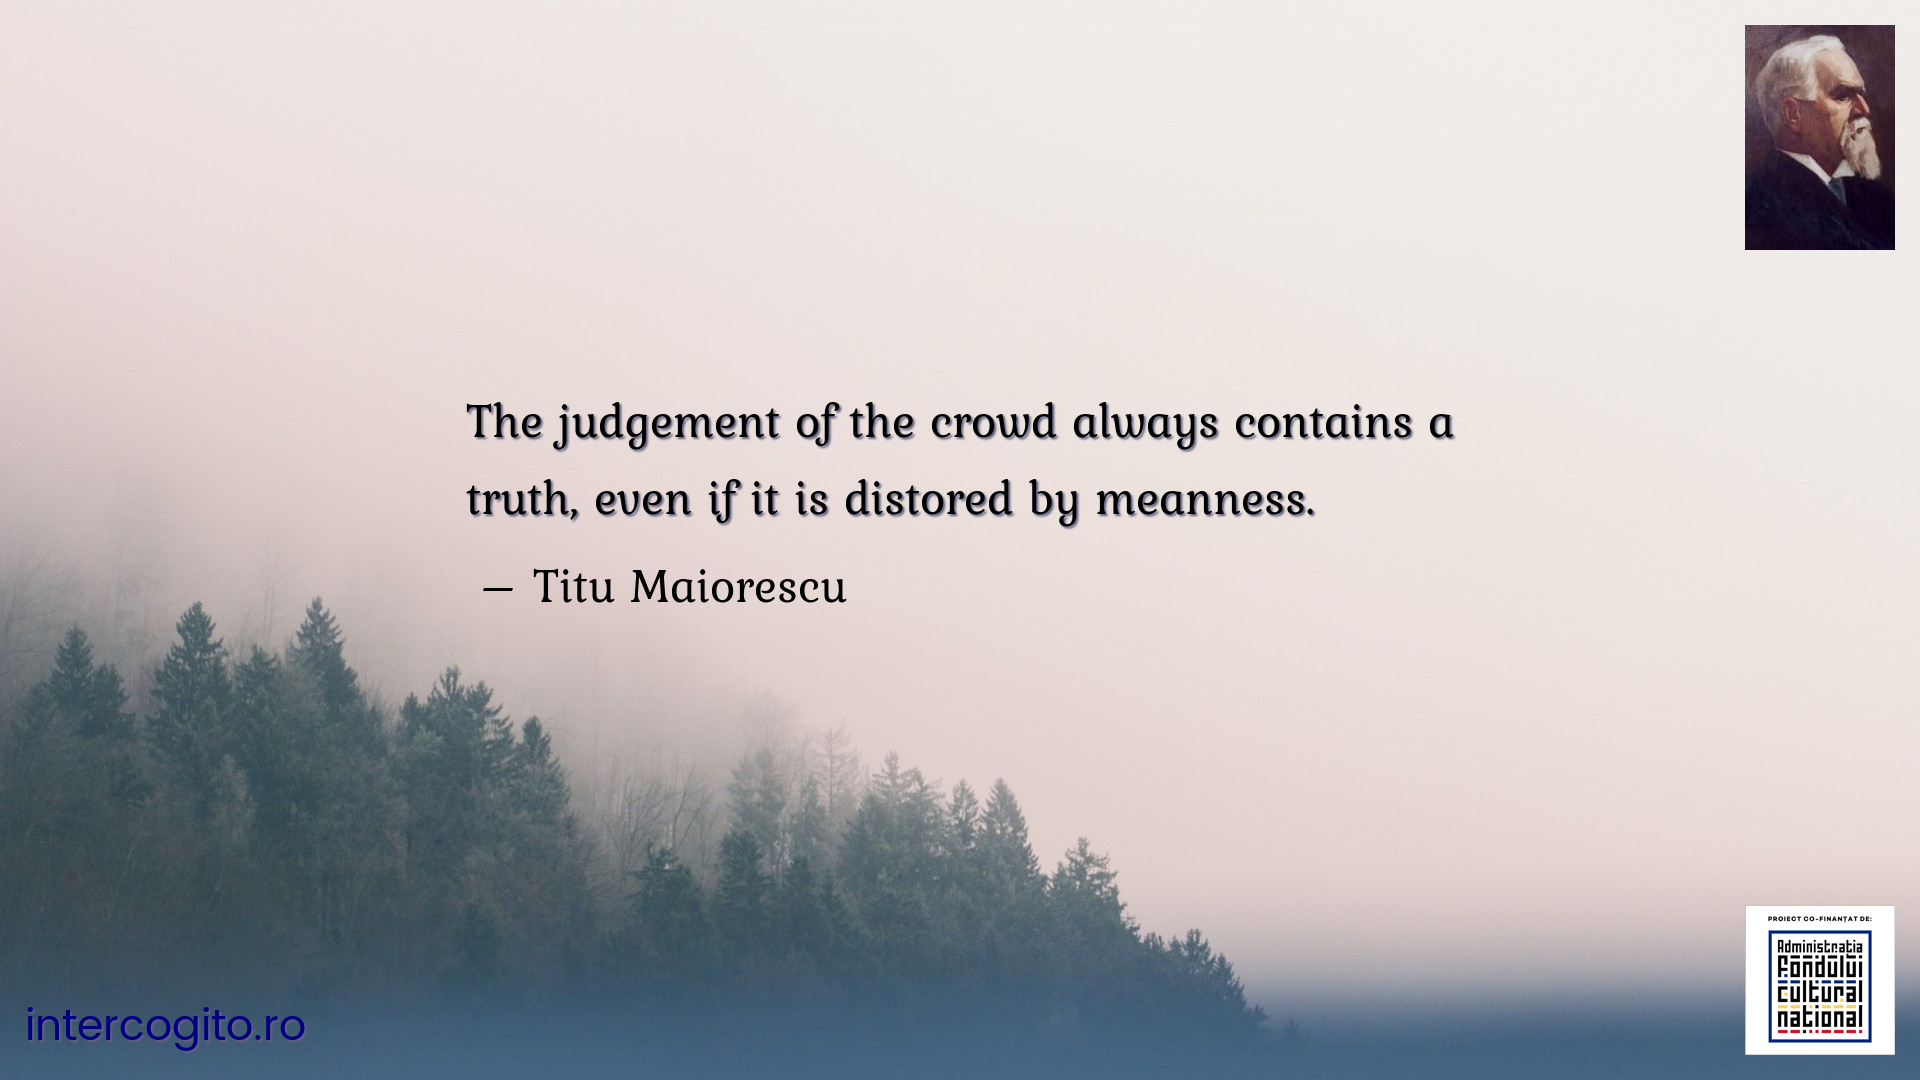 The judgement of the crowd always contains a truth, even if it is distored by meanness.